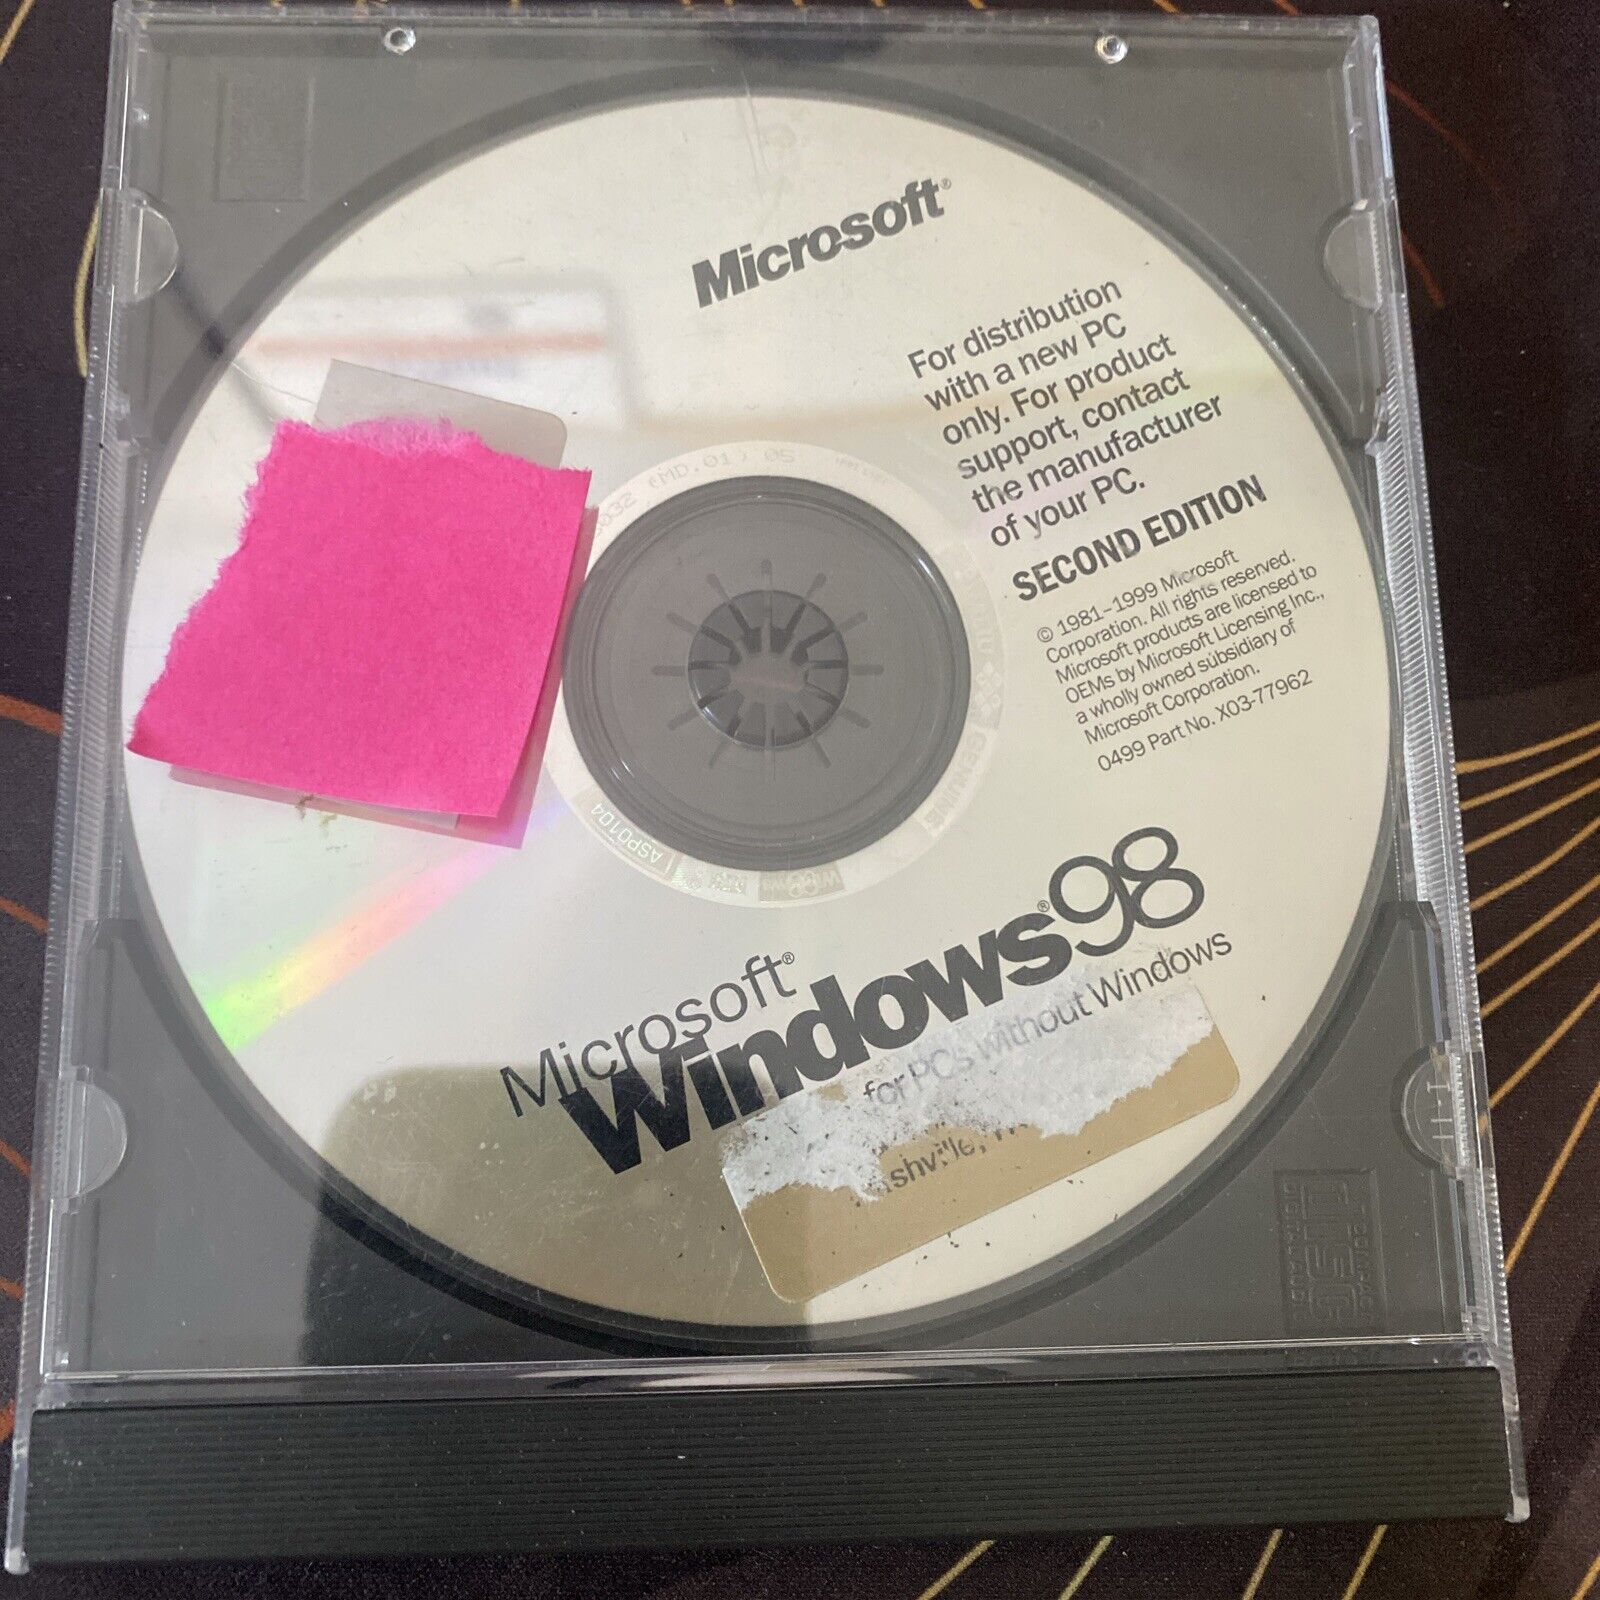 Microsoft Windows 98 Second Edition Disc For PCs Without Windows W/ Key